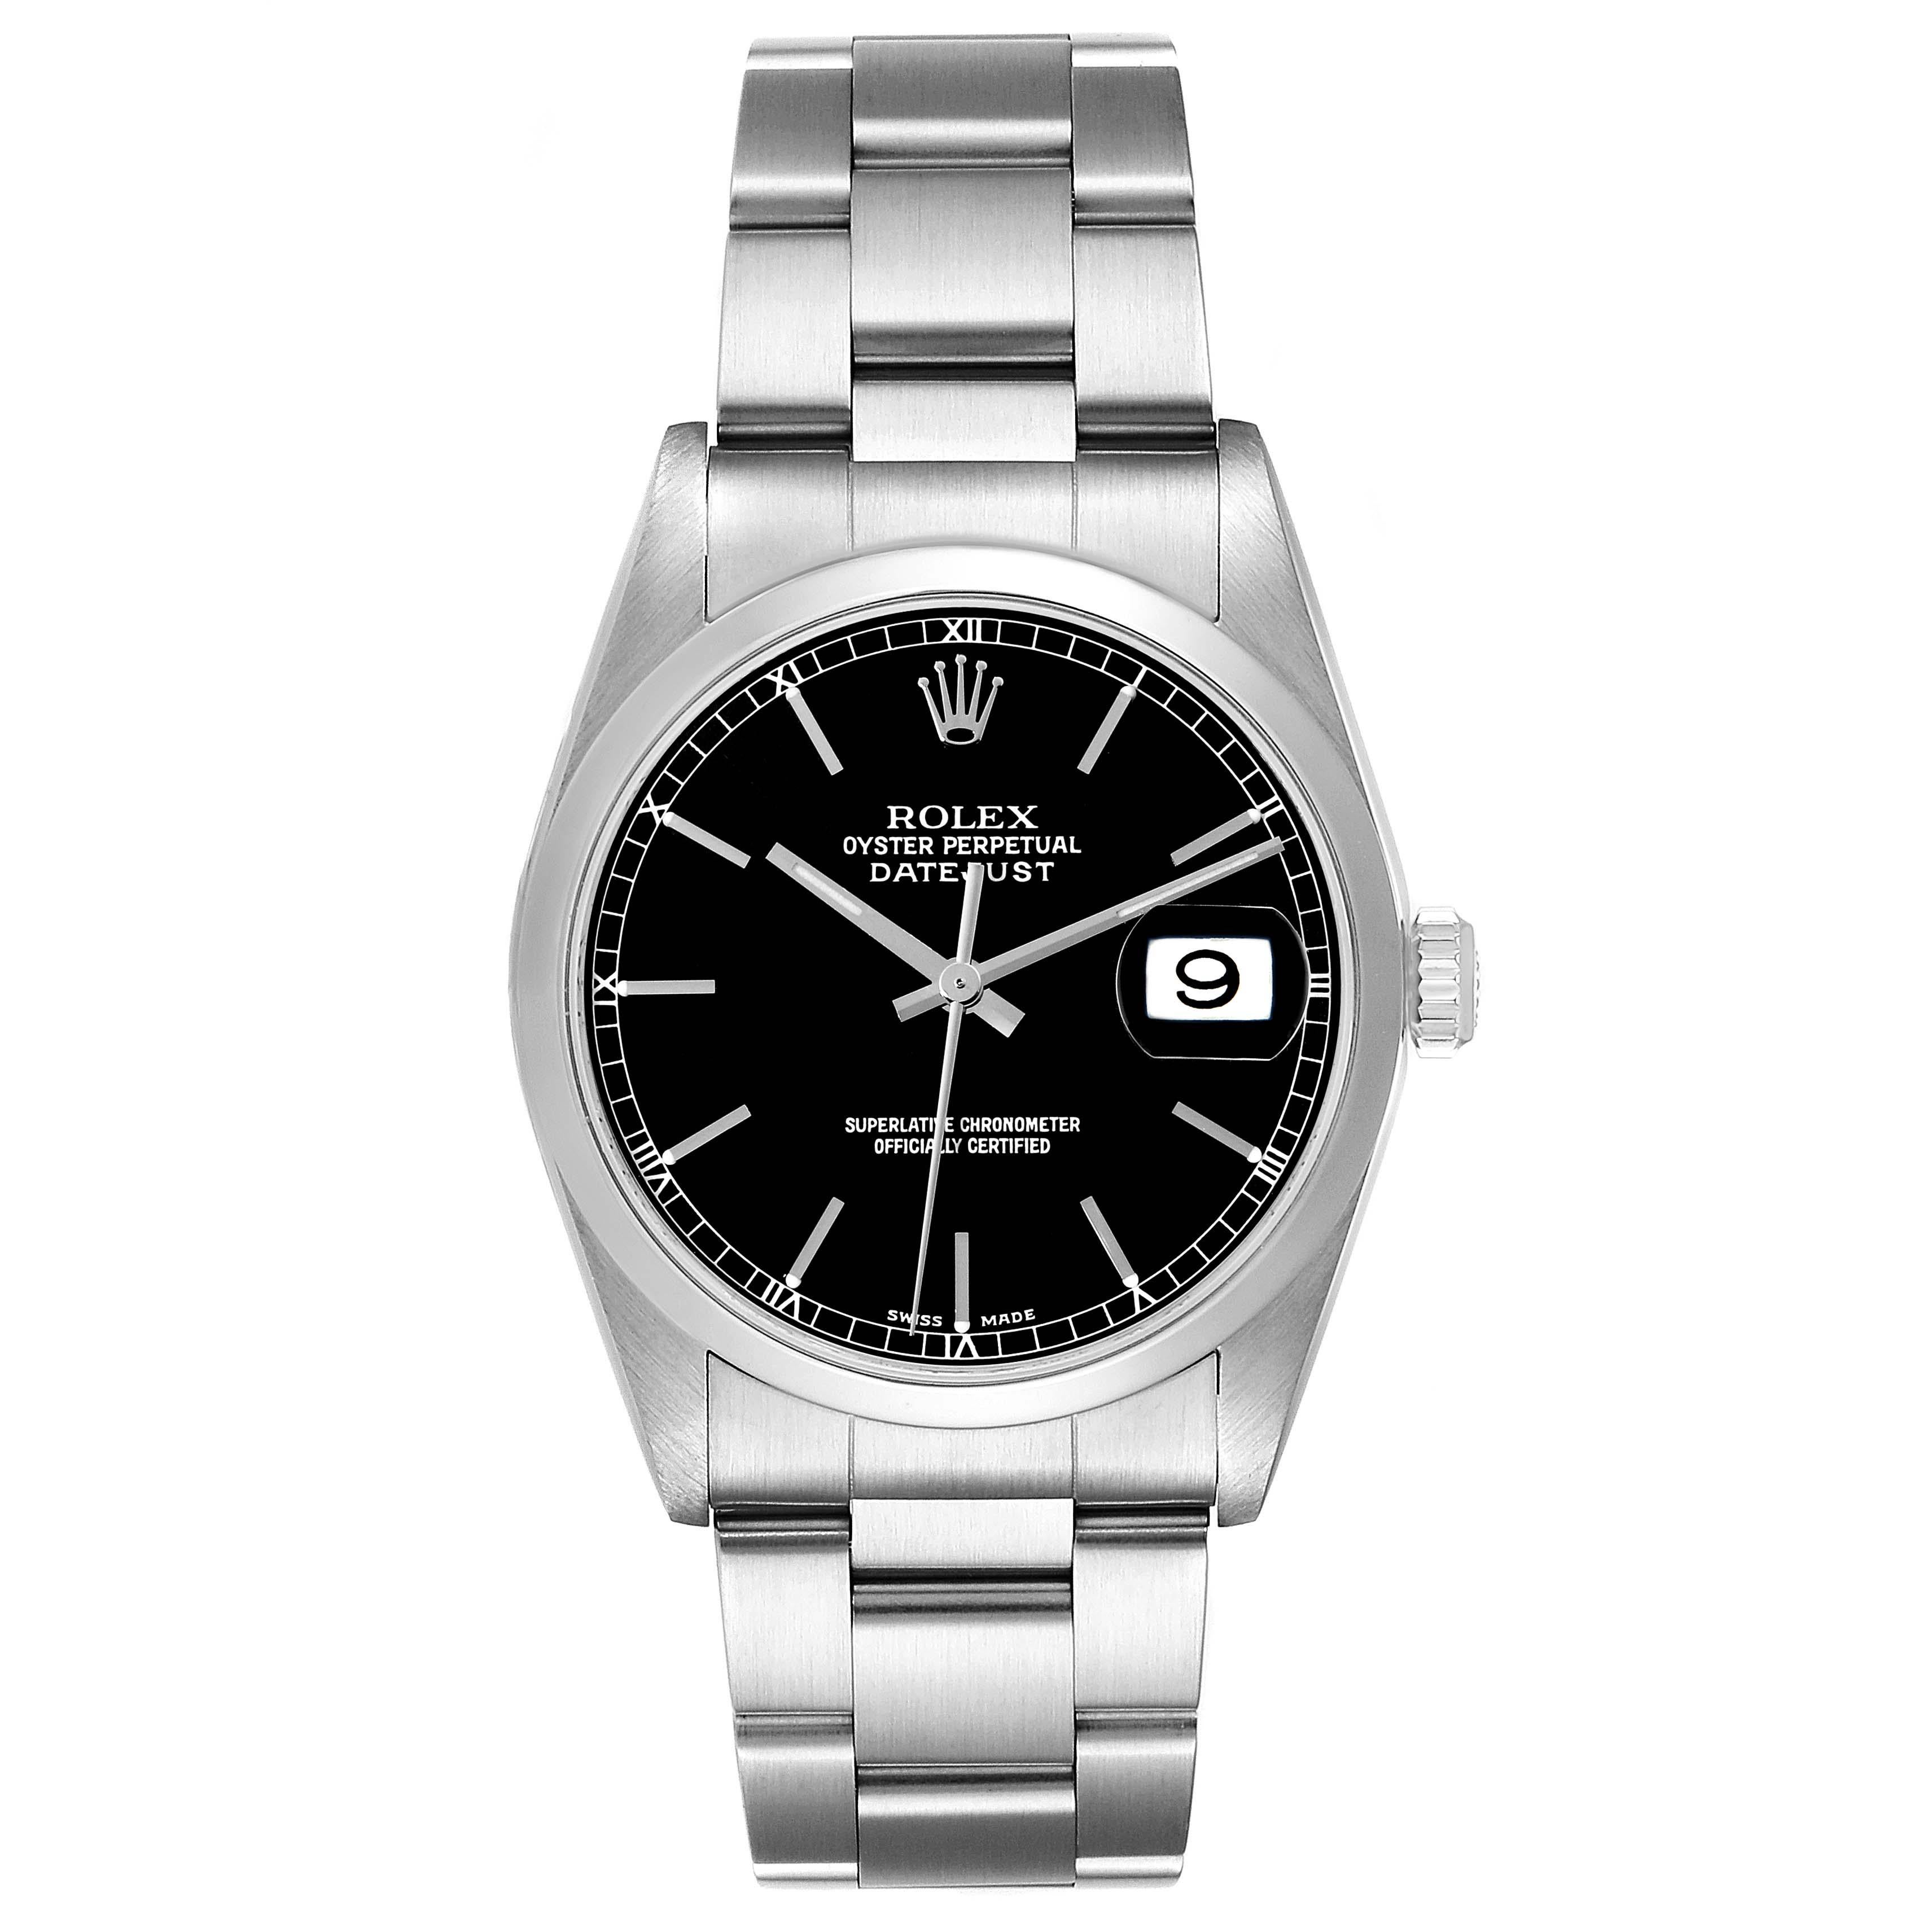 Rolex Datejust 36mm Black Dial Smooth Bezel Steel Mens Watch 16200 Box Papers. Officially certified chronometer automatic self-winding movement with quickset date function. Stainless steel oyster case 36mm in diameter. Rolex logo on the crown.